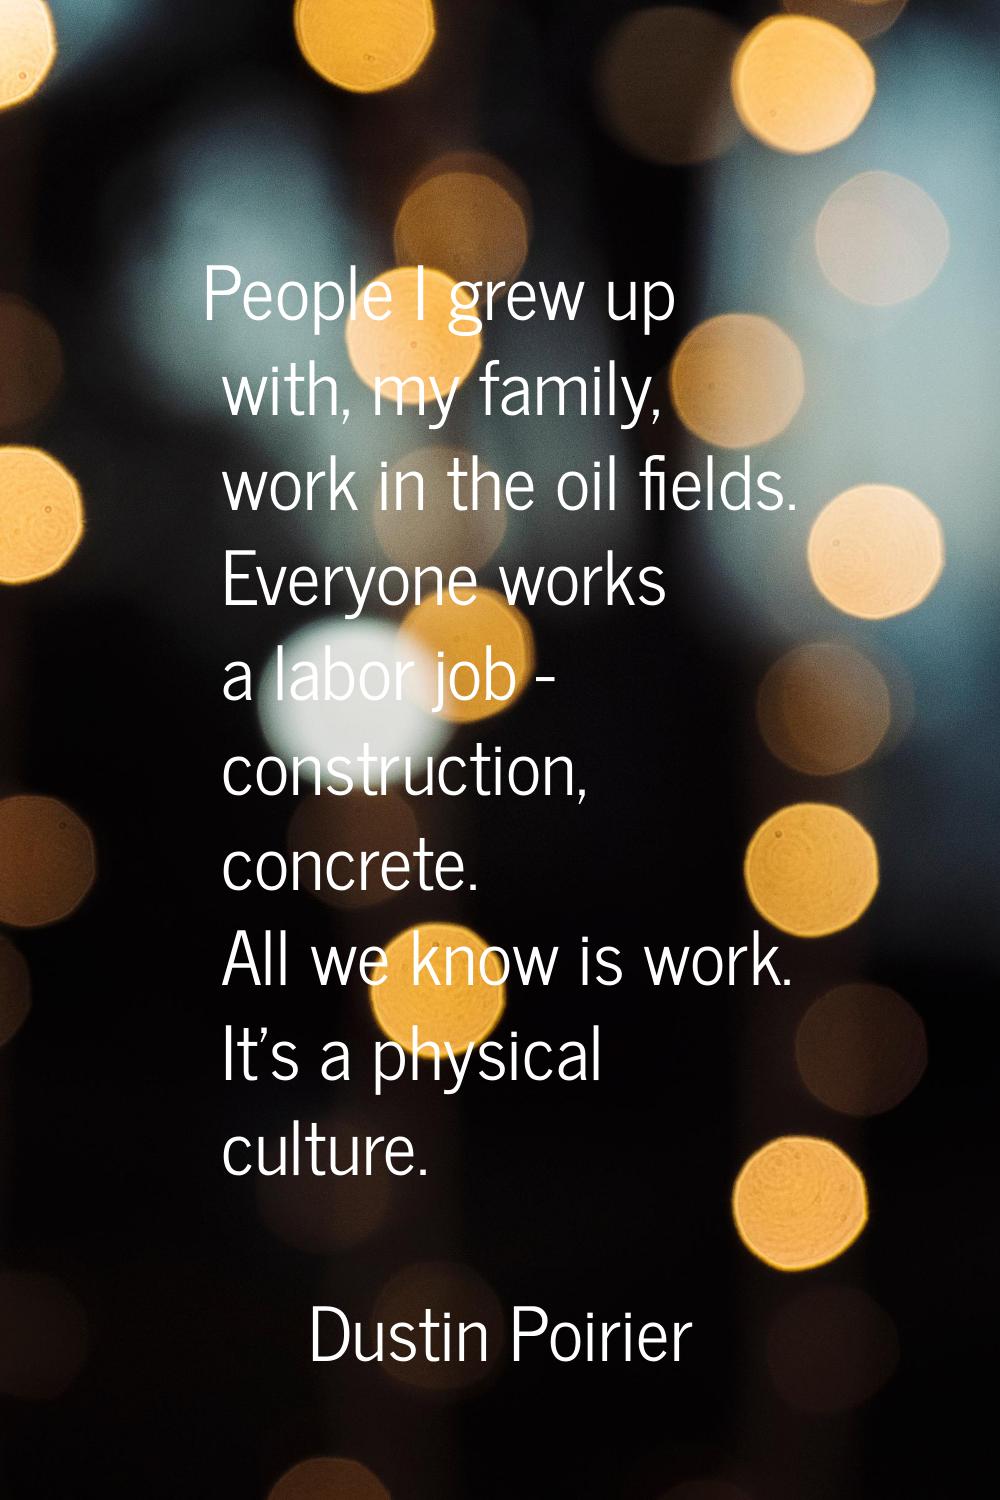 People I grew up with, my family, work in the oil fields. Everyone works a labor job - construction